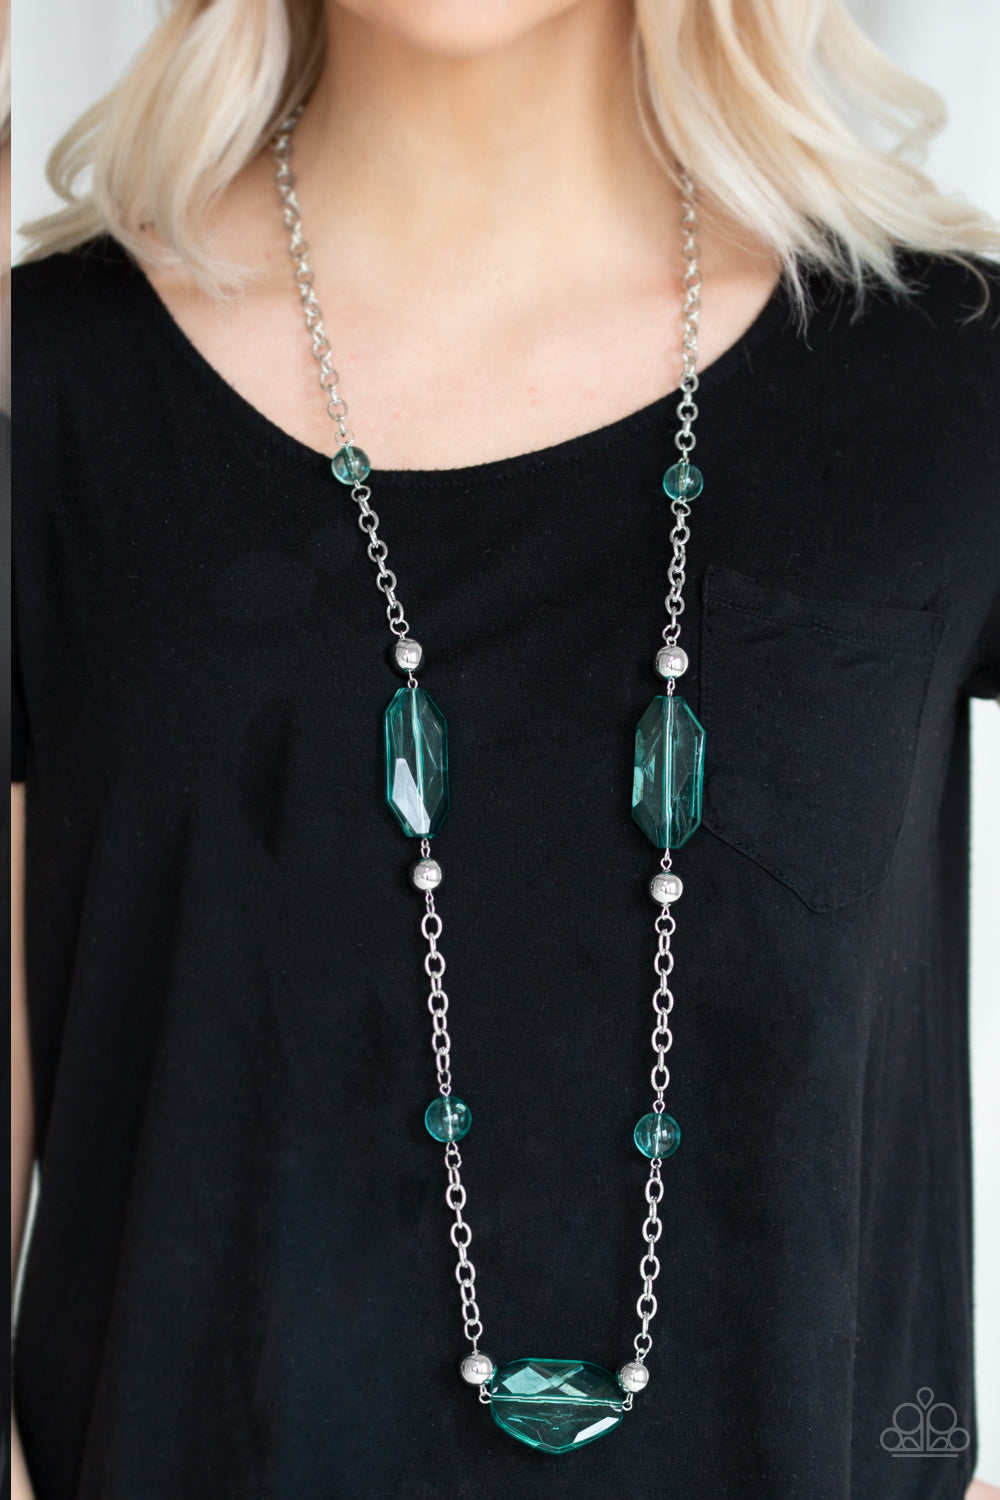 Crystal Charm - Green necklace